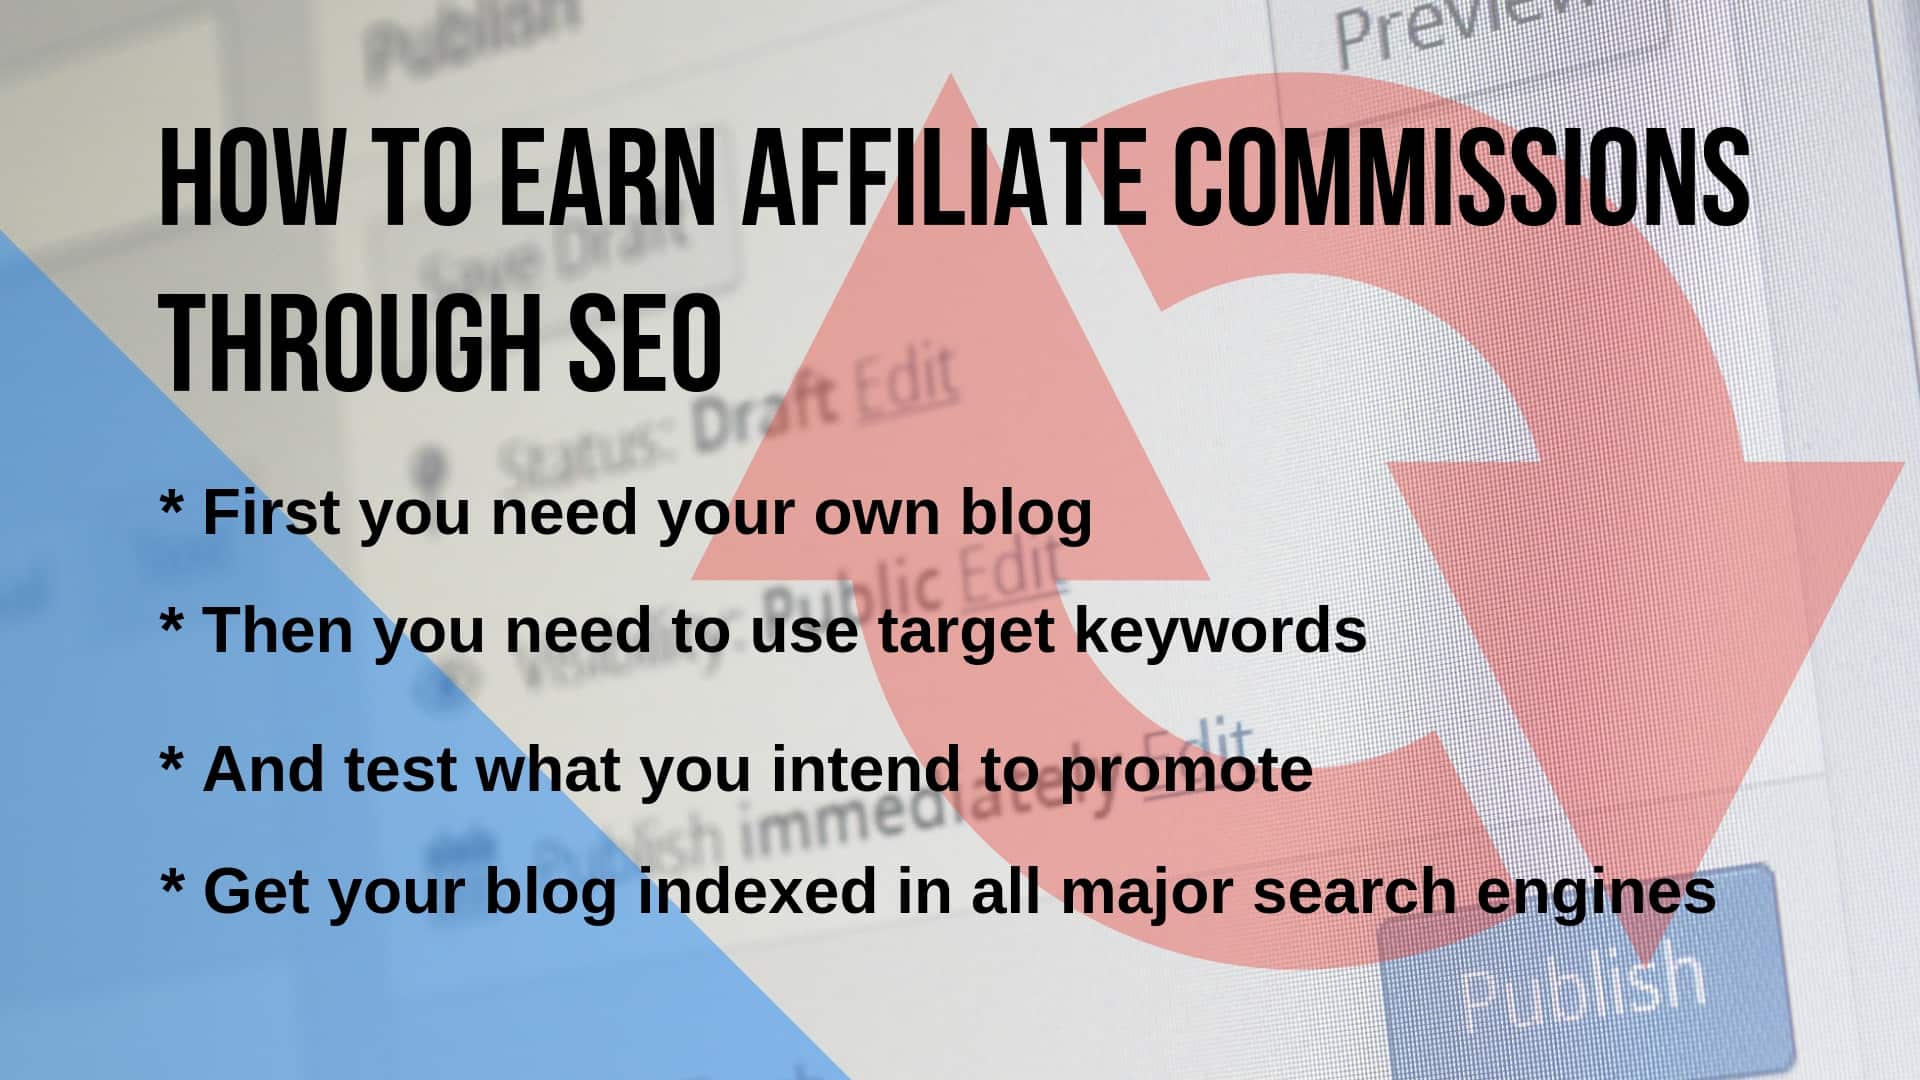 Earn affiliate commissions online through SEO